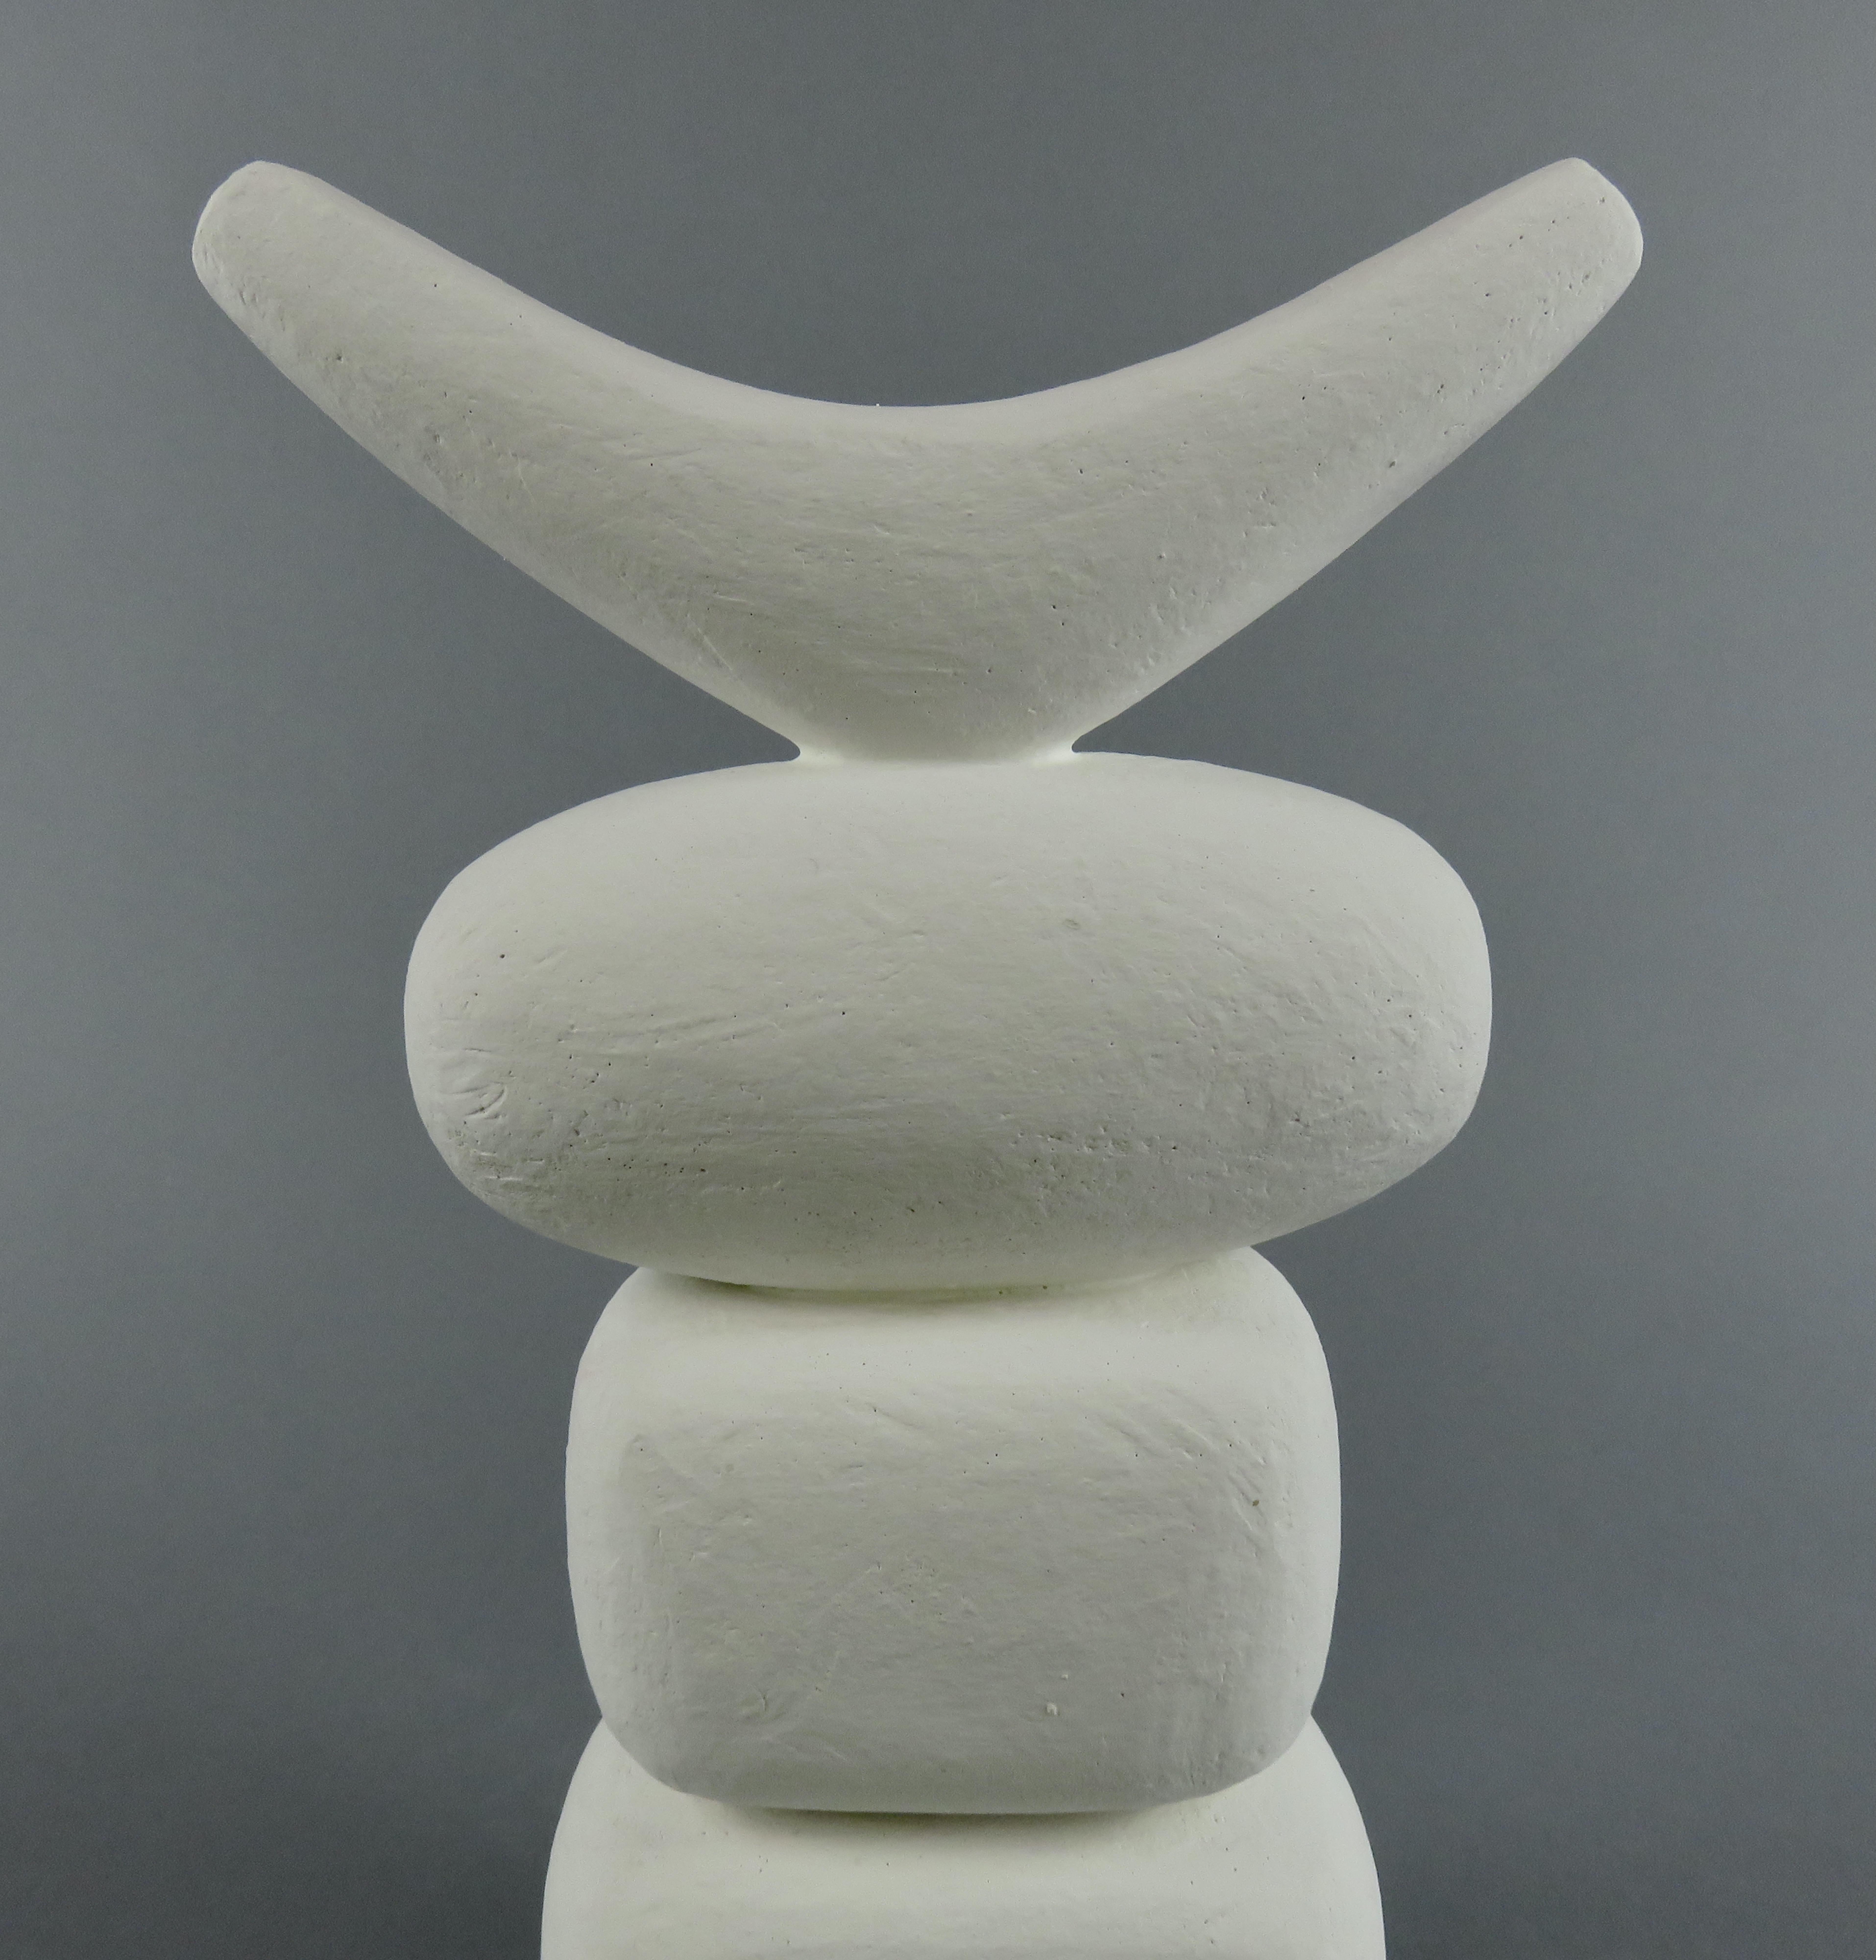 Contemporary White Winged Crown, 4 Part Ceramic TOTEM, Hand Built Sculpture by H. Starcevic For Sale